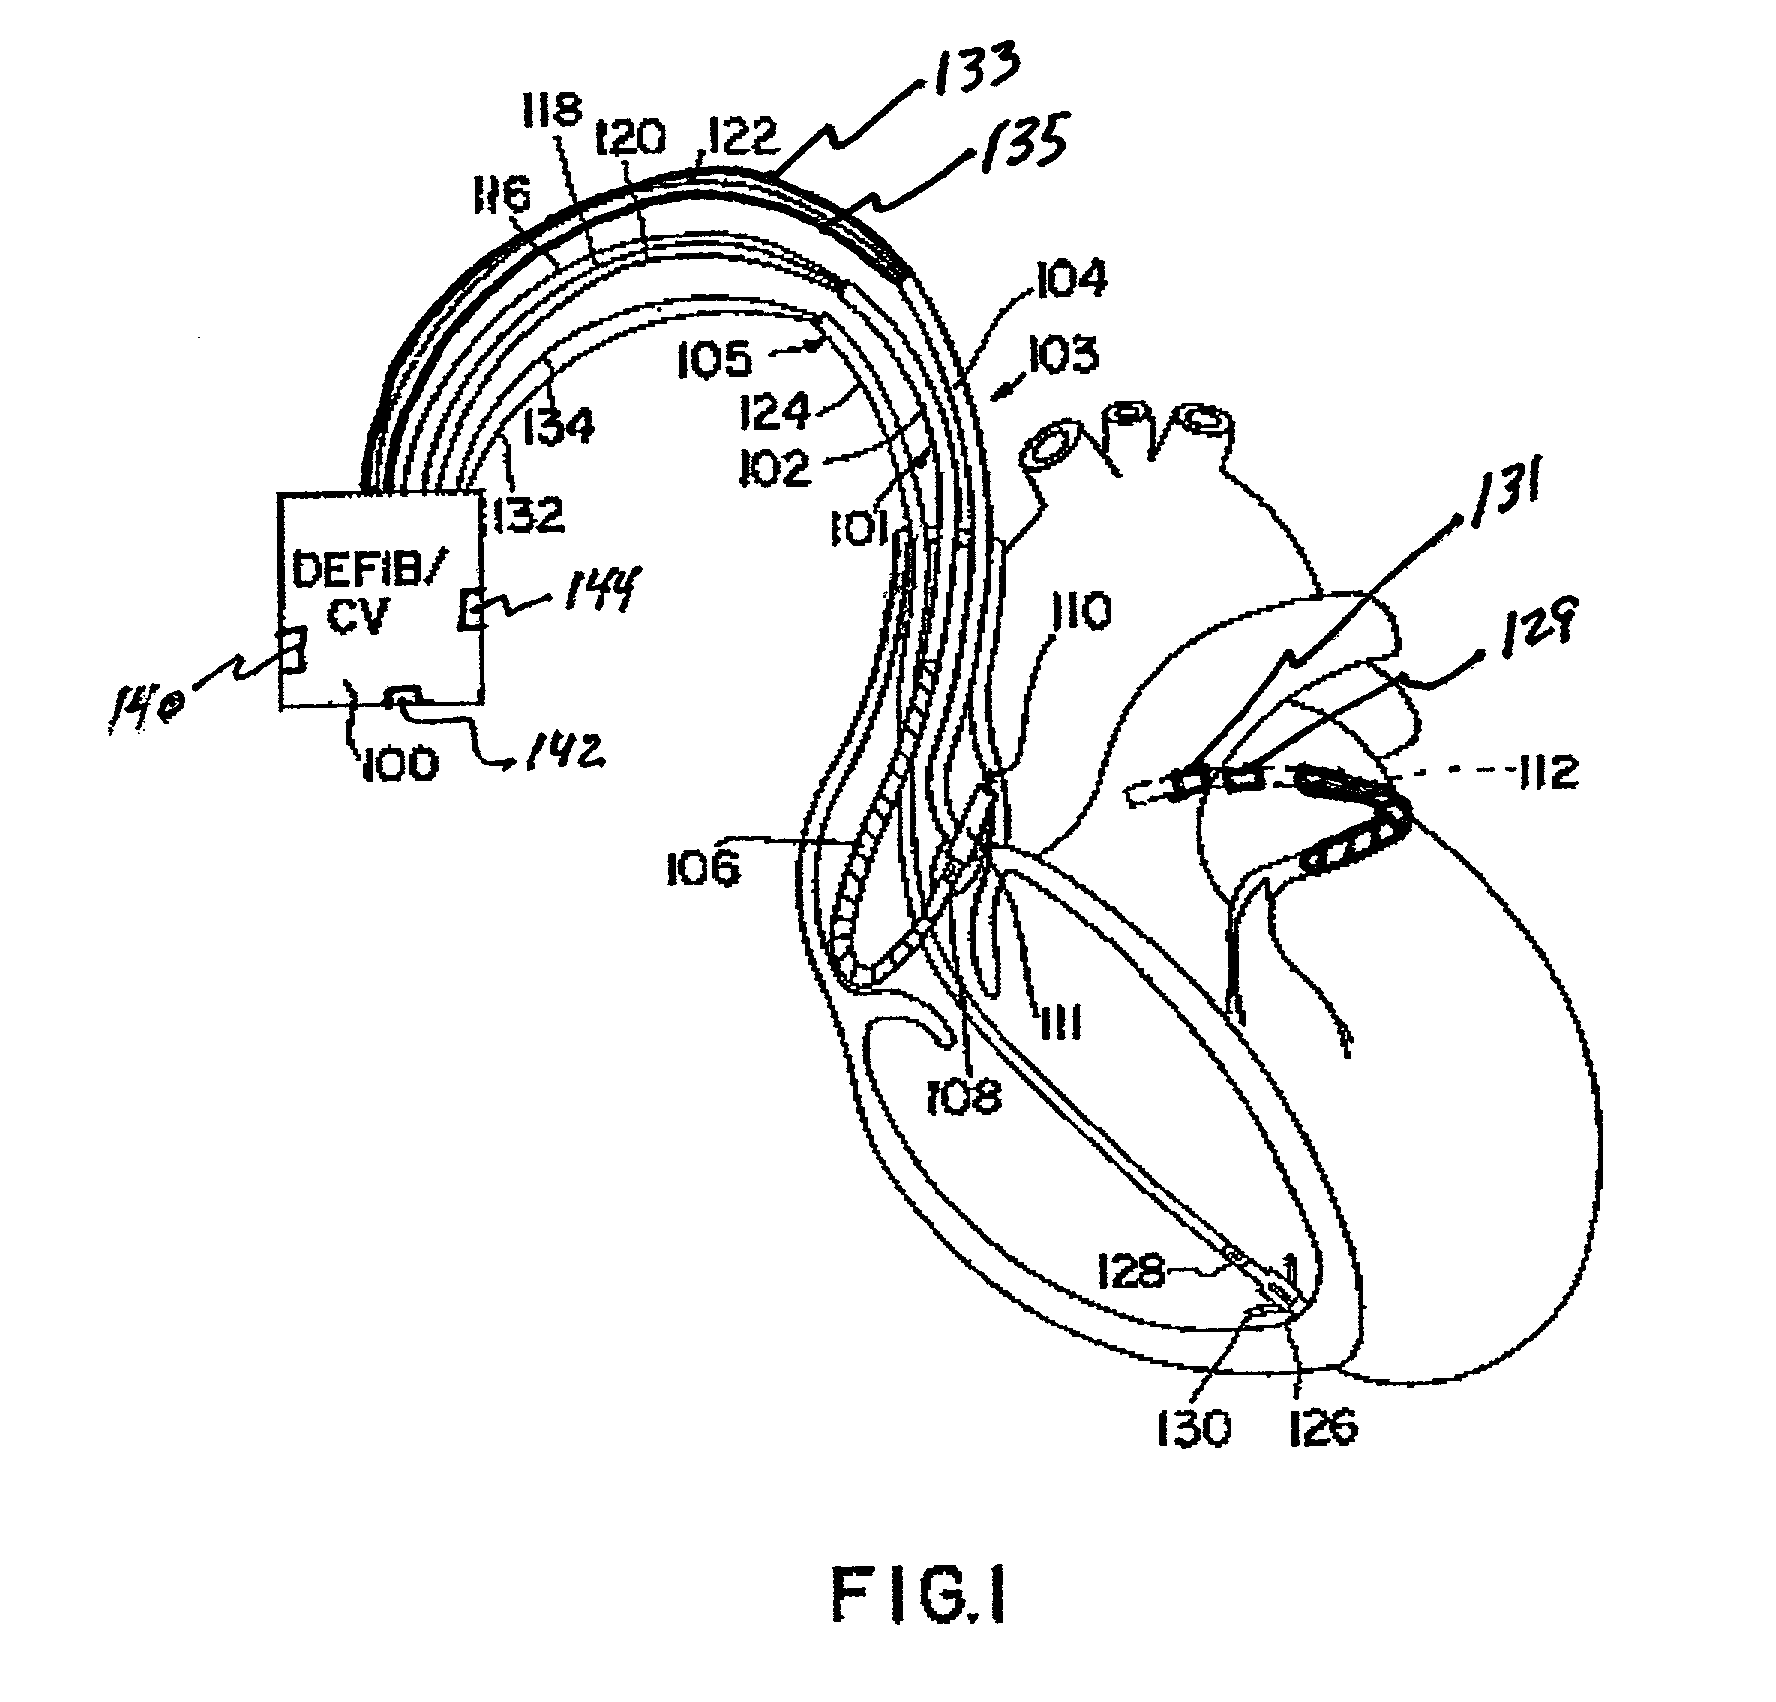 Method and apparatus for affecting atrial defibrillation with bi-atrial pacing